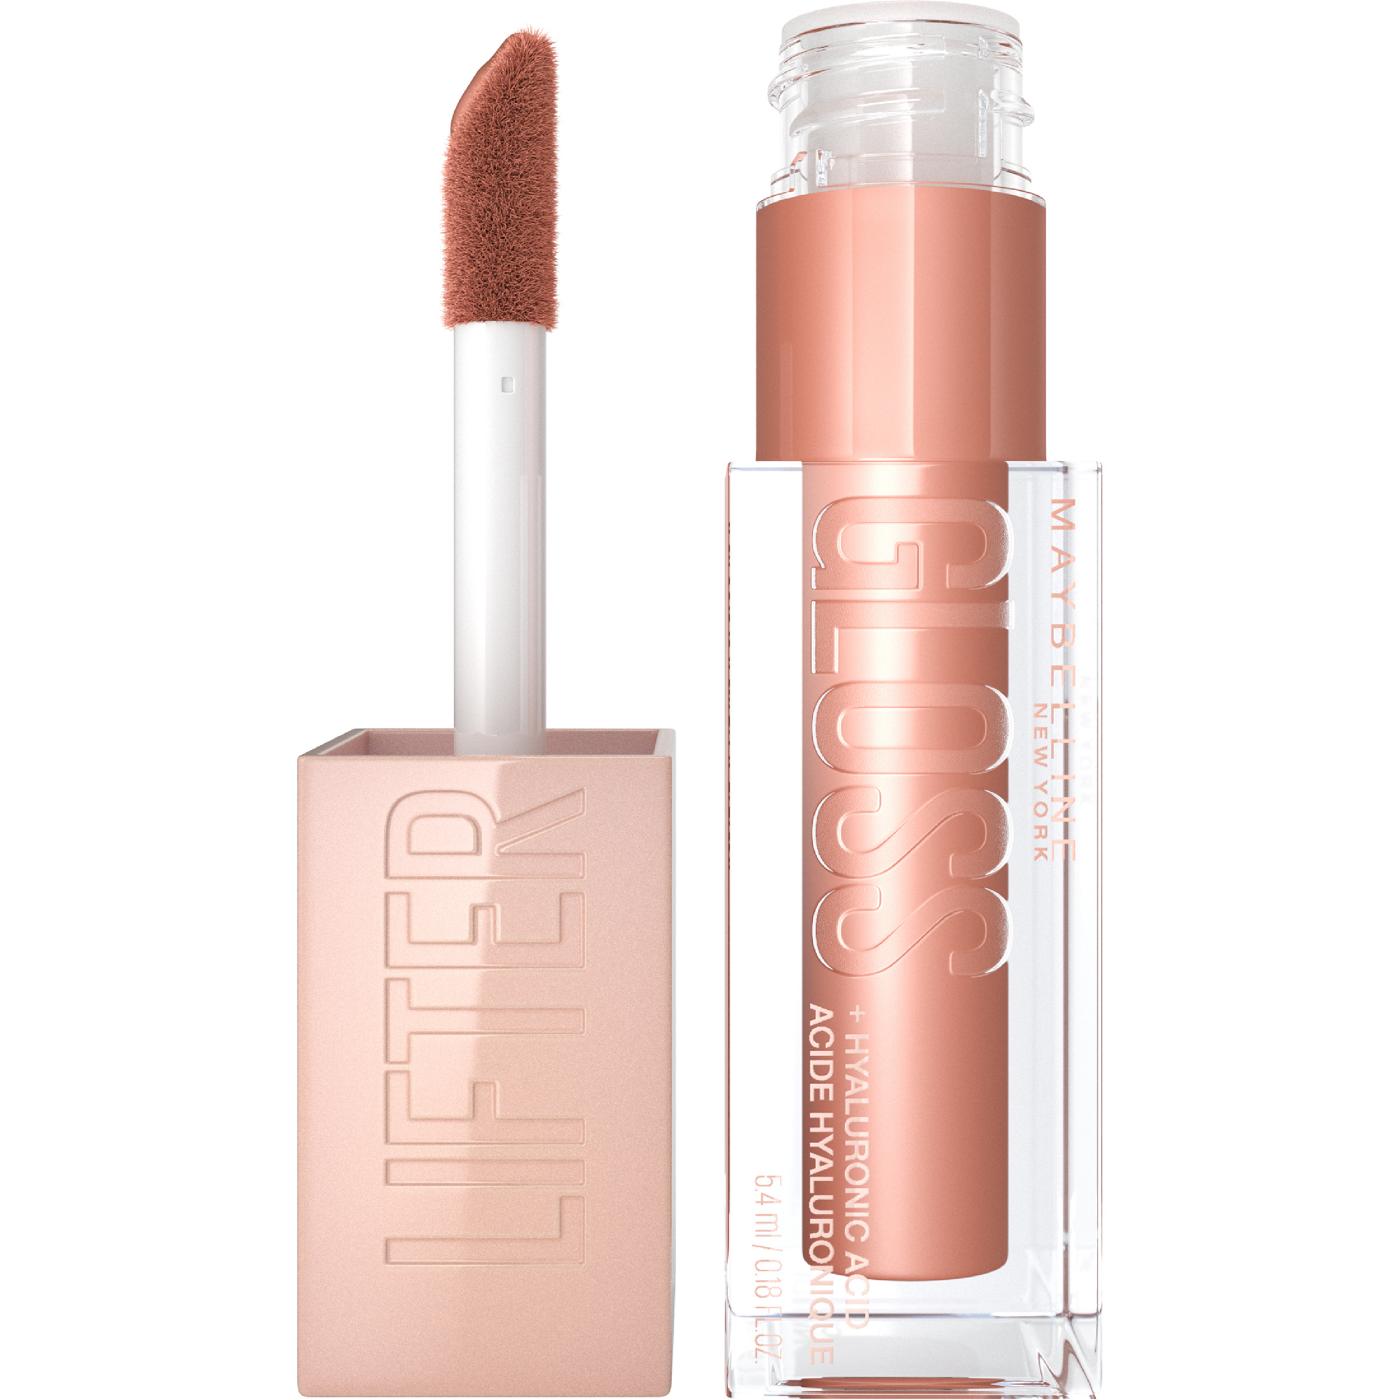 Maybelline Lifter Gloss with Hyaluronic Acid - Stone; image 1 of 6